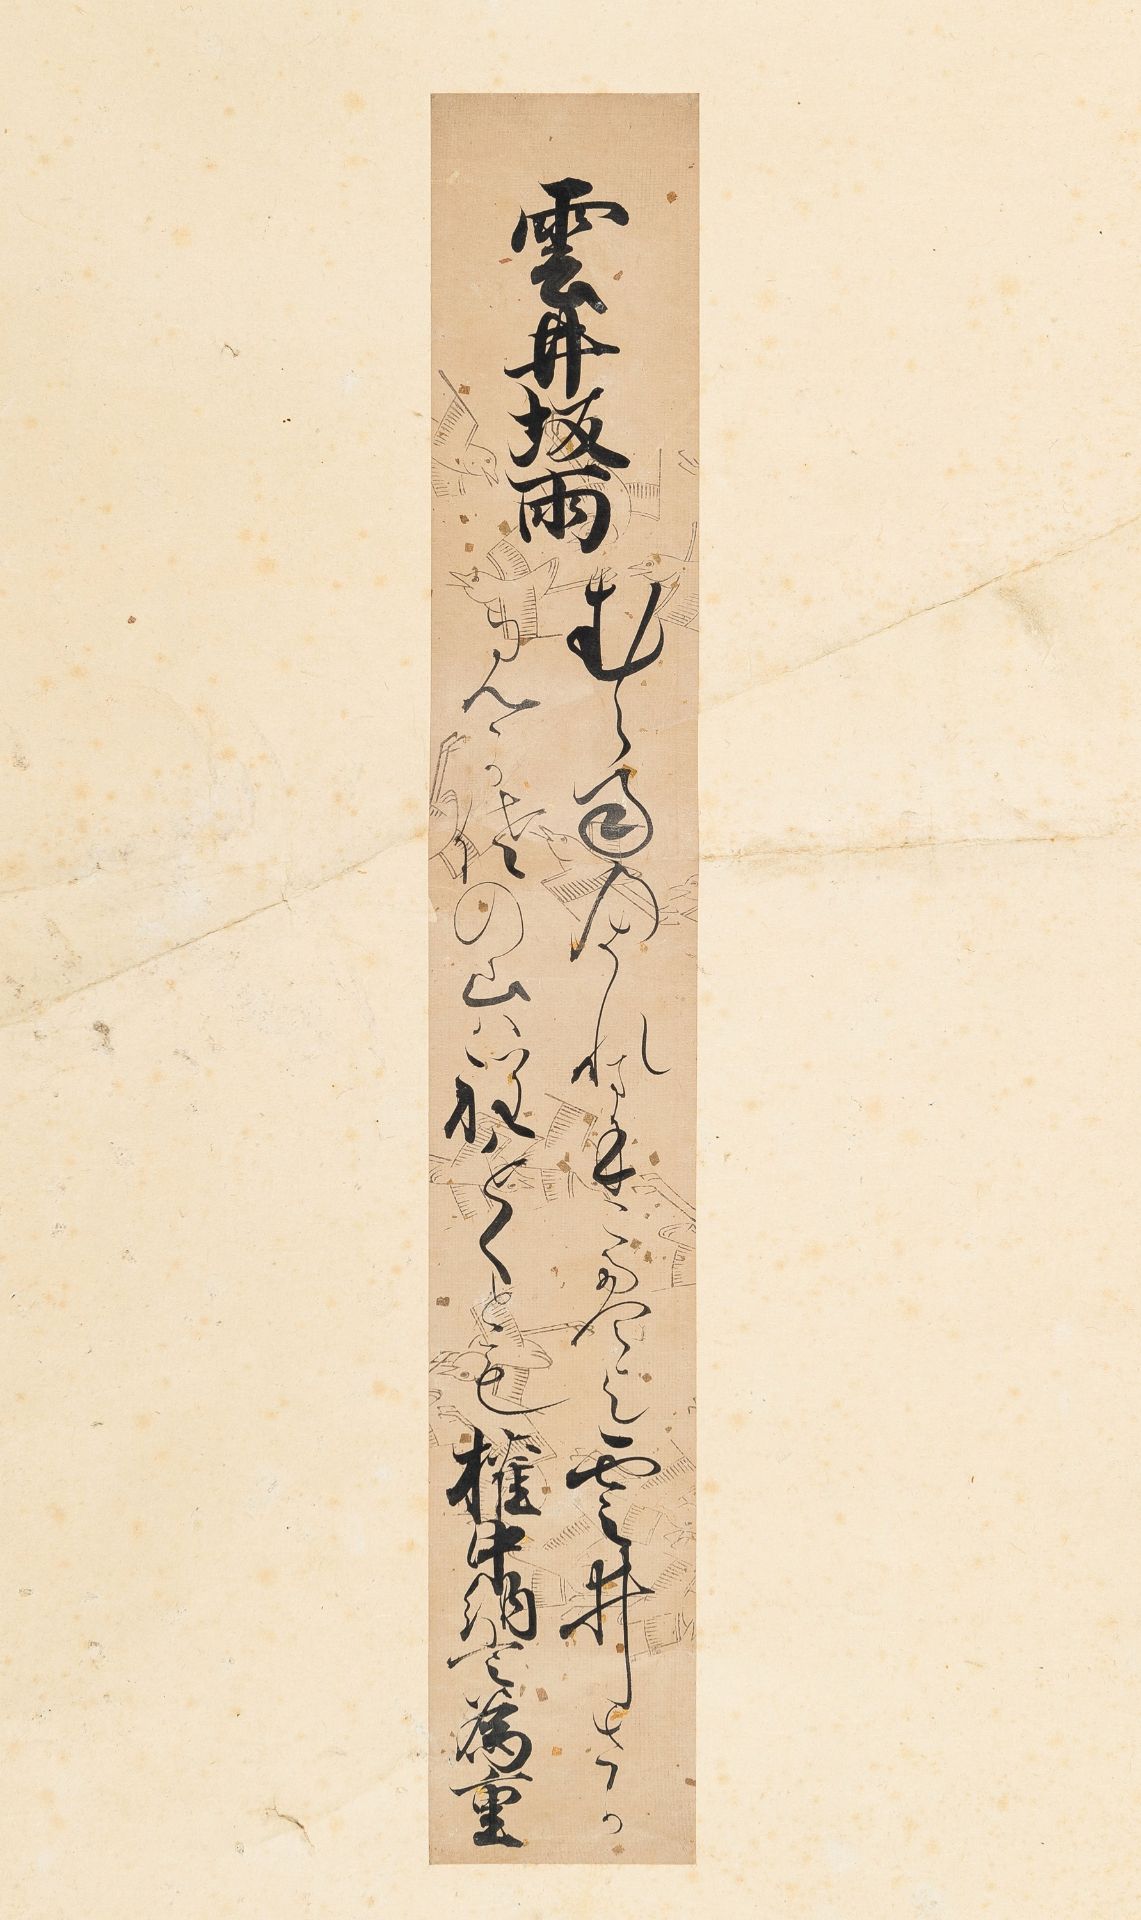 A RARE SCROLL PAINTING WITH MASTERLY CALIGRAPHY